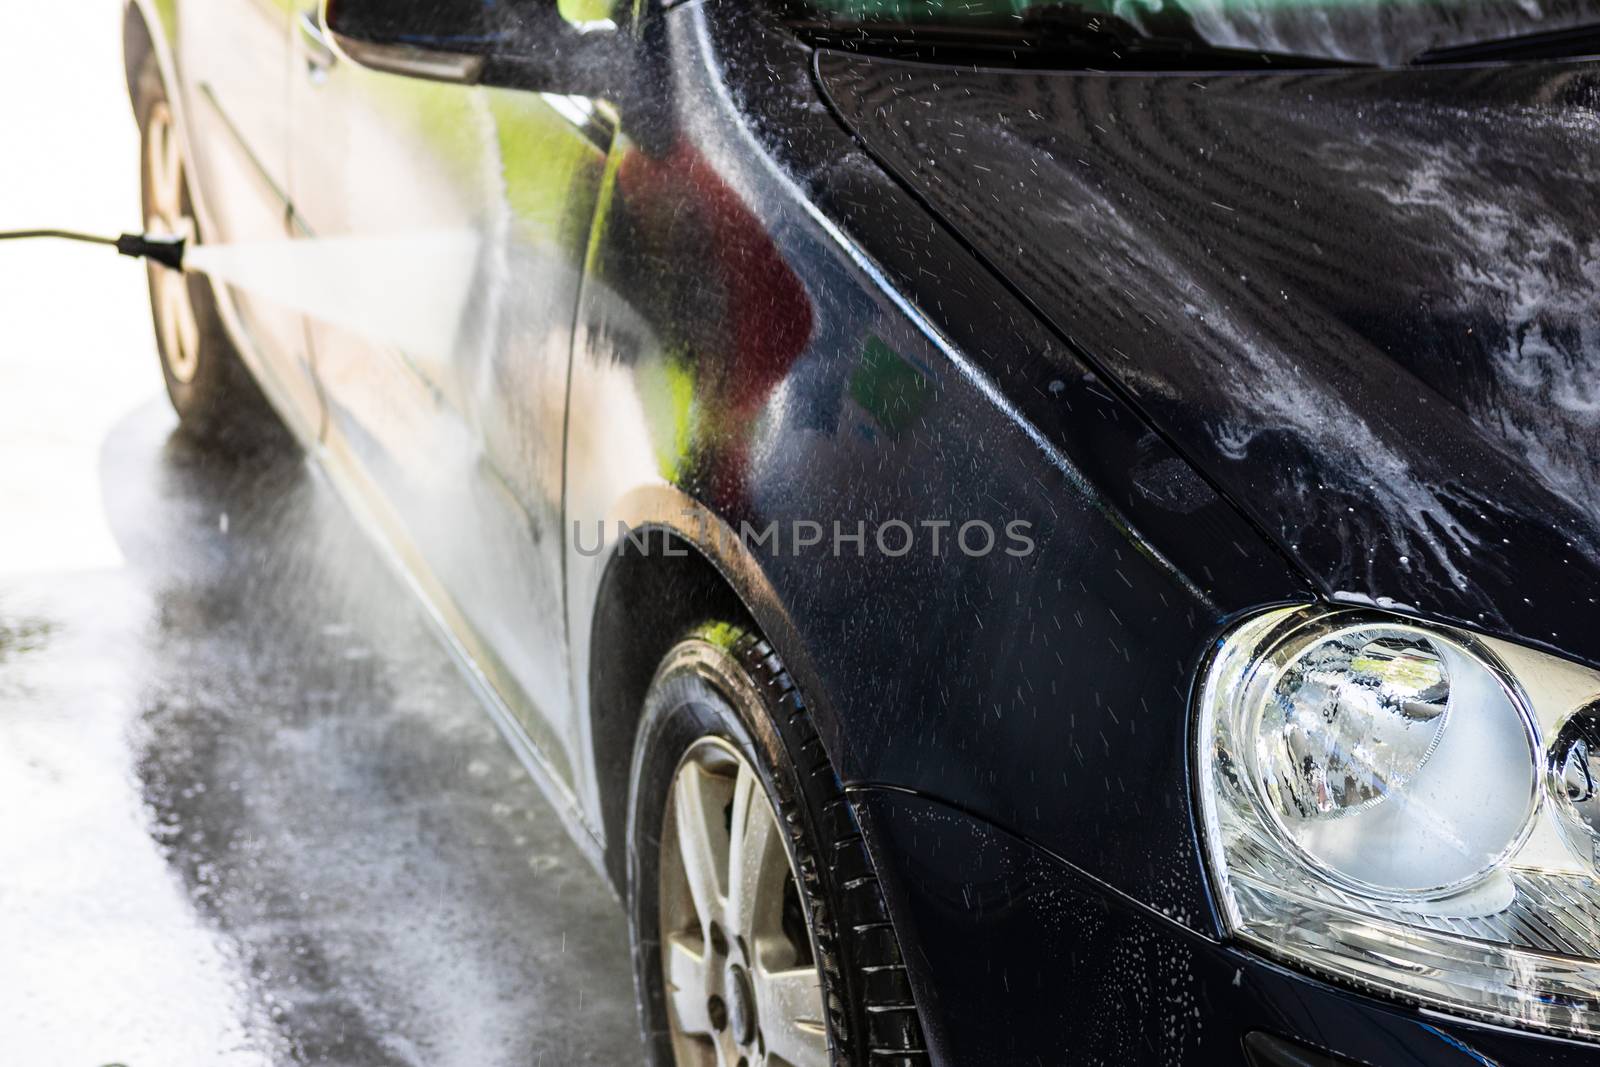 Washing and cleaning car in self service car wash station. Car washing using high pressure water in Bucharest, Romania, 2020